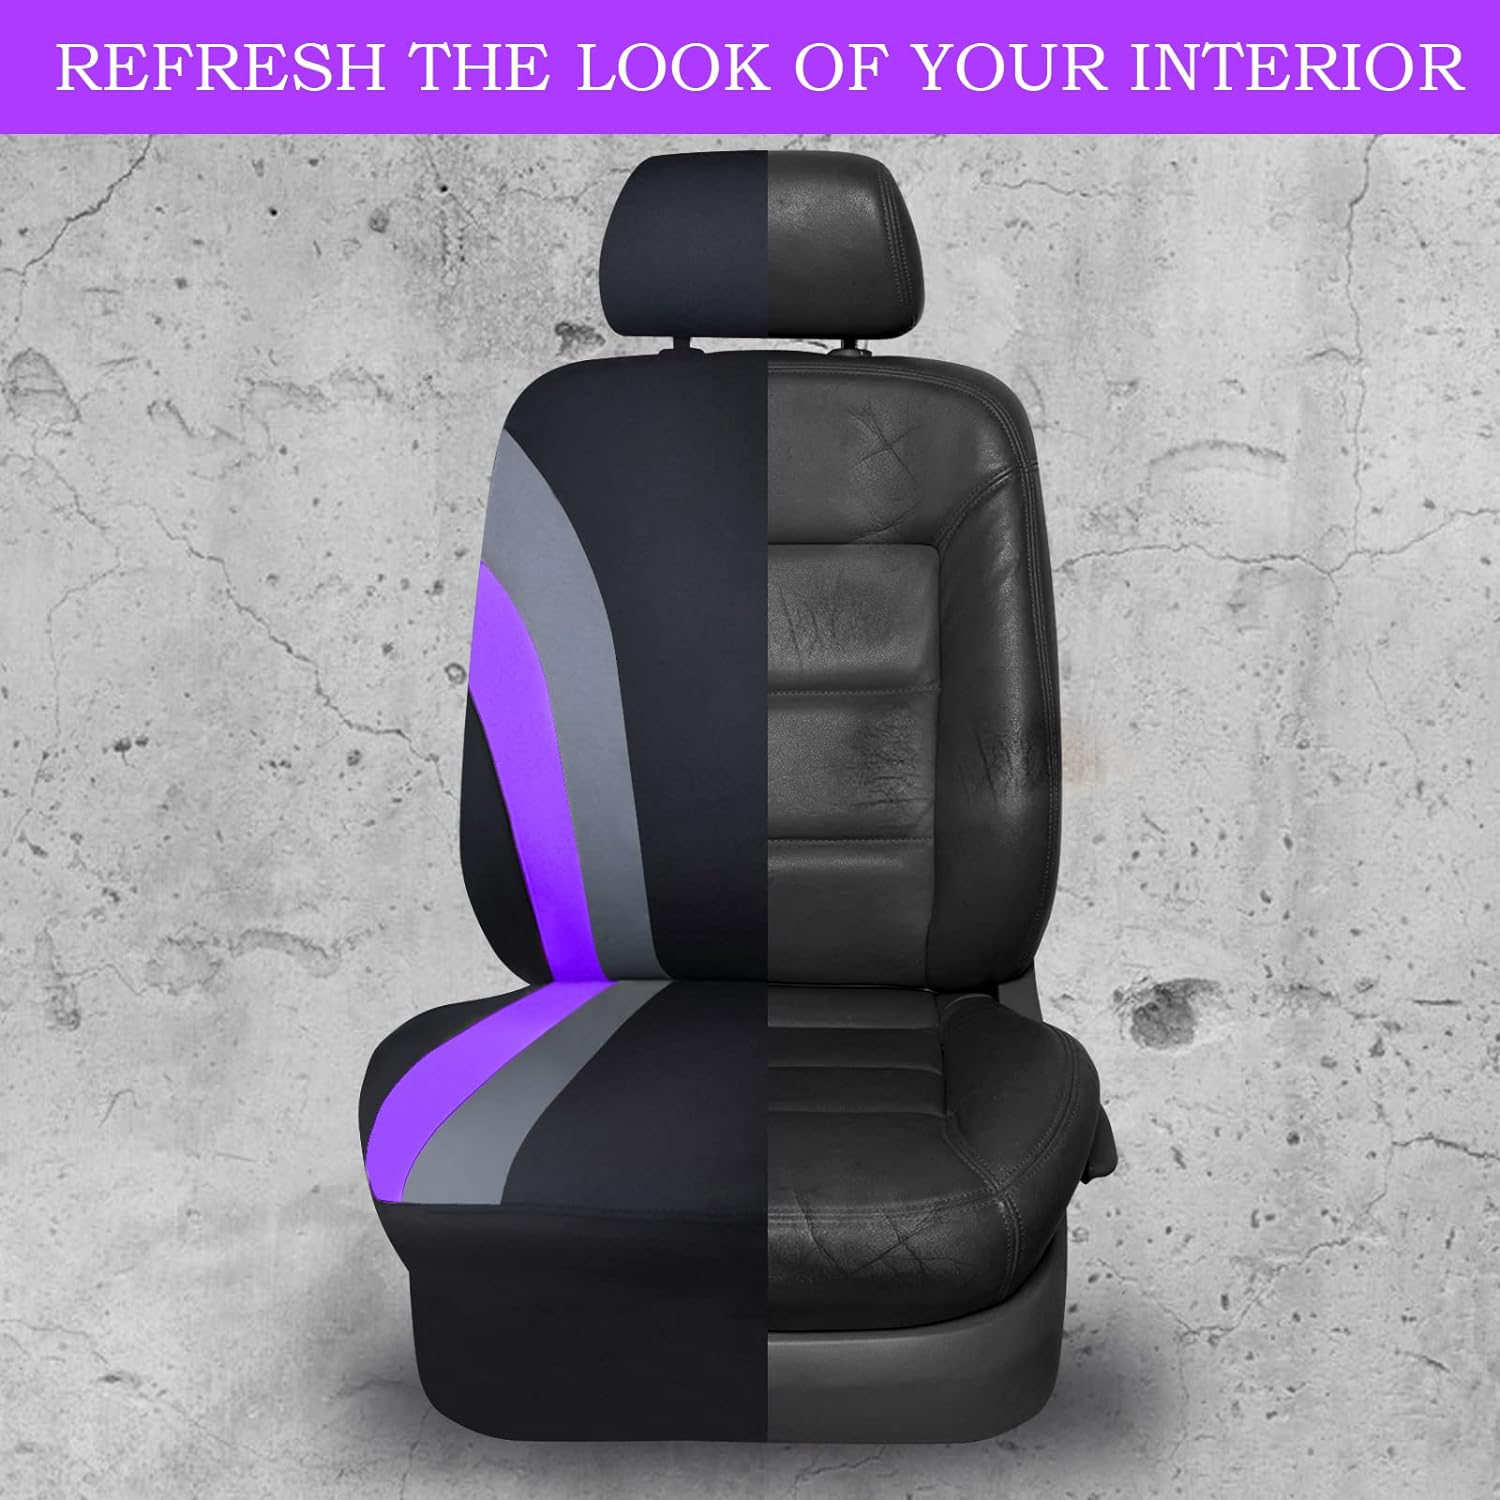 CAR PASS Line Rider Sporty Steering Wheel Cover and Car Seat Cover Sets. 11PCS Universal Fit Car Seat Cover with 14.5-15 Inch Steering Wheel Cover.(Black and Purple)